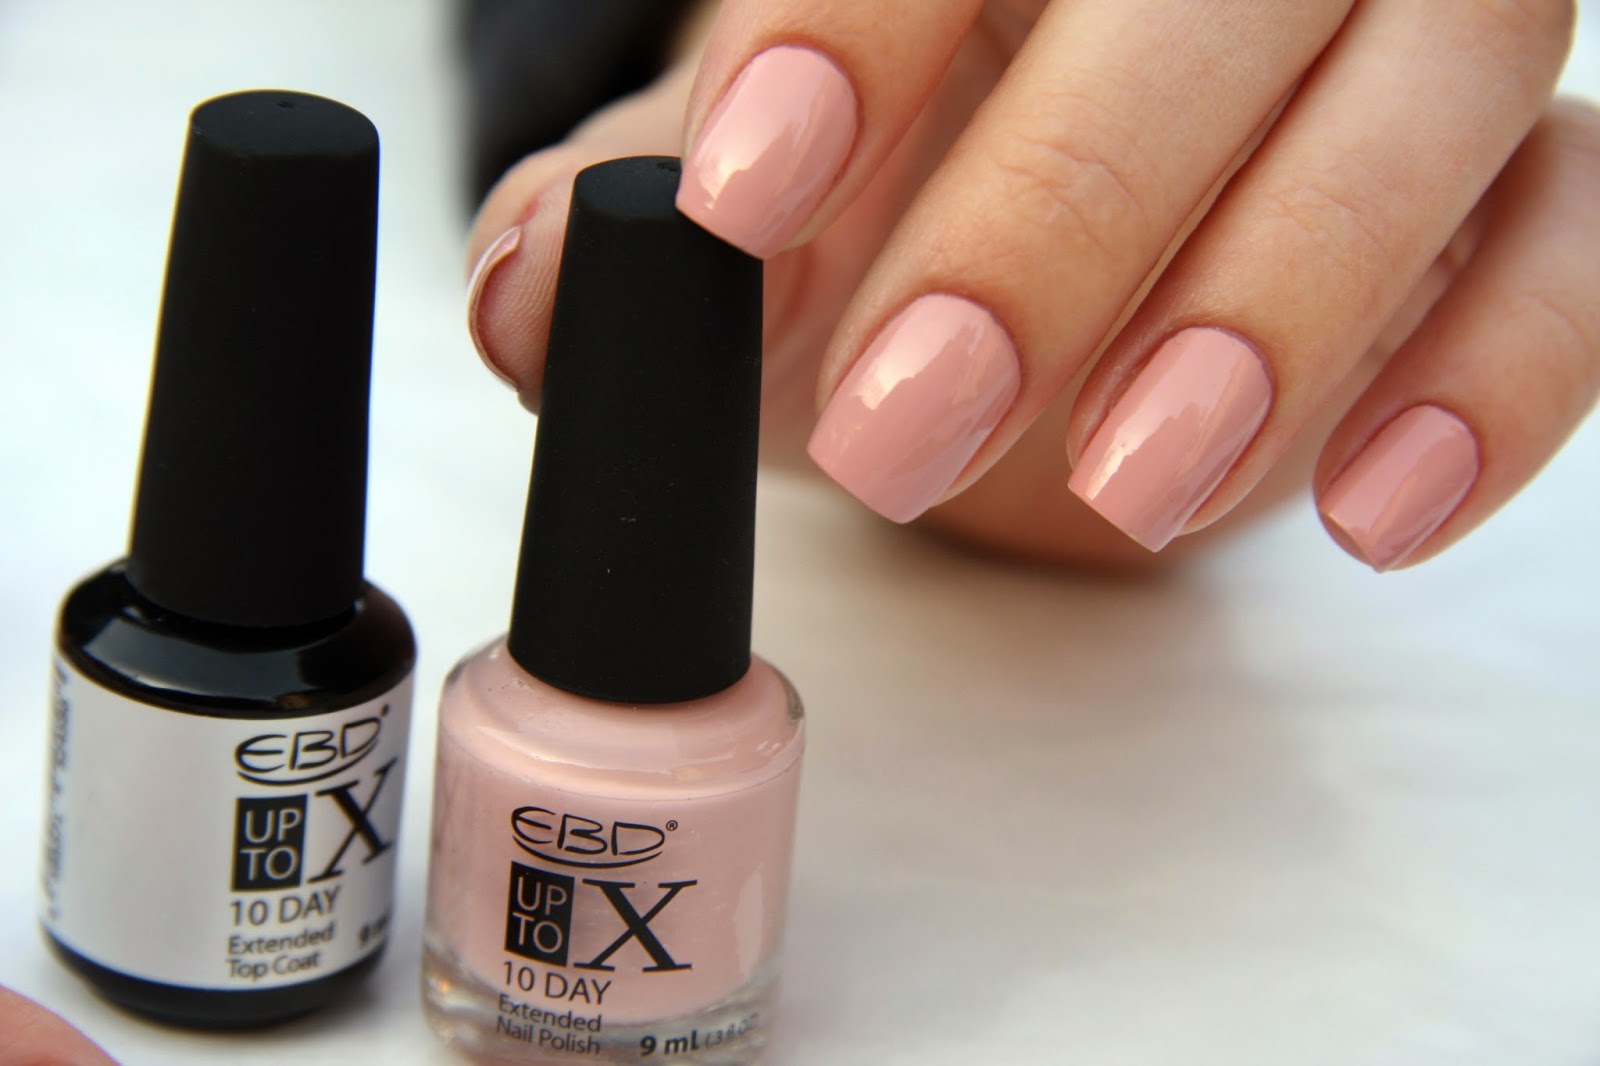 Anisek Nail Blog Ebd Upto X 10day 01 Marchmallow